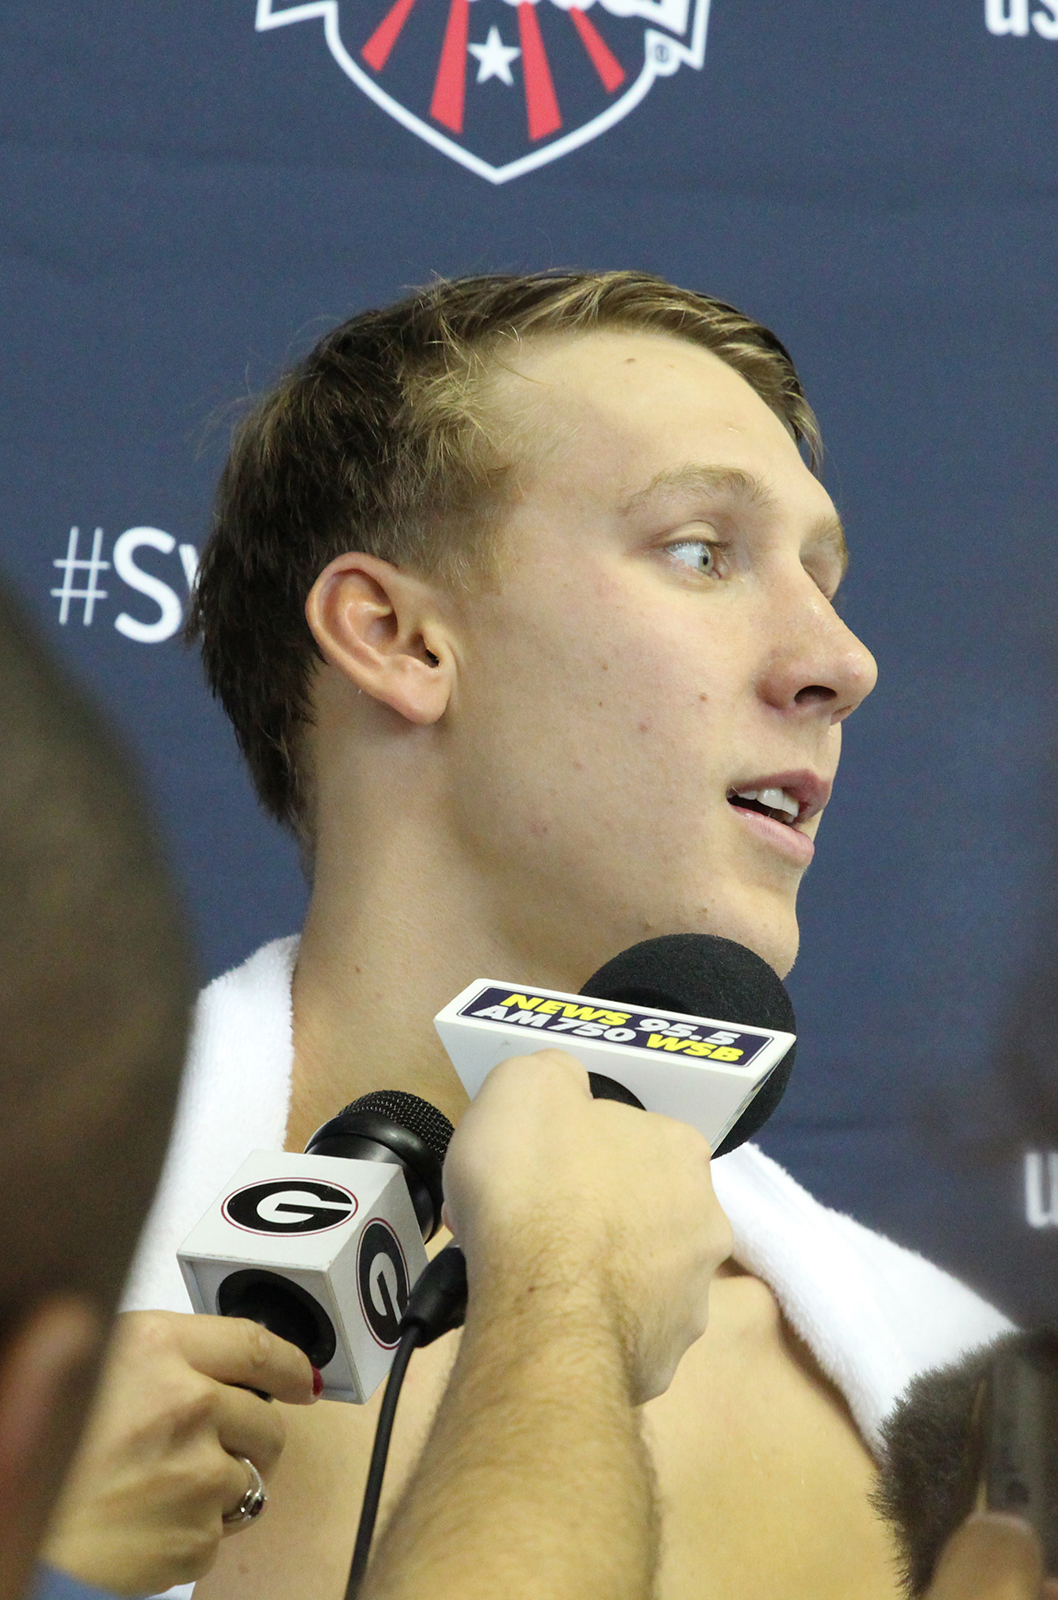 Chase Kalisz talks with media following an open practice session at Georgia Tech's McAuley Aquatic Center on July 30, 2016